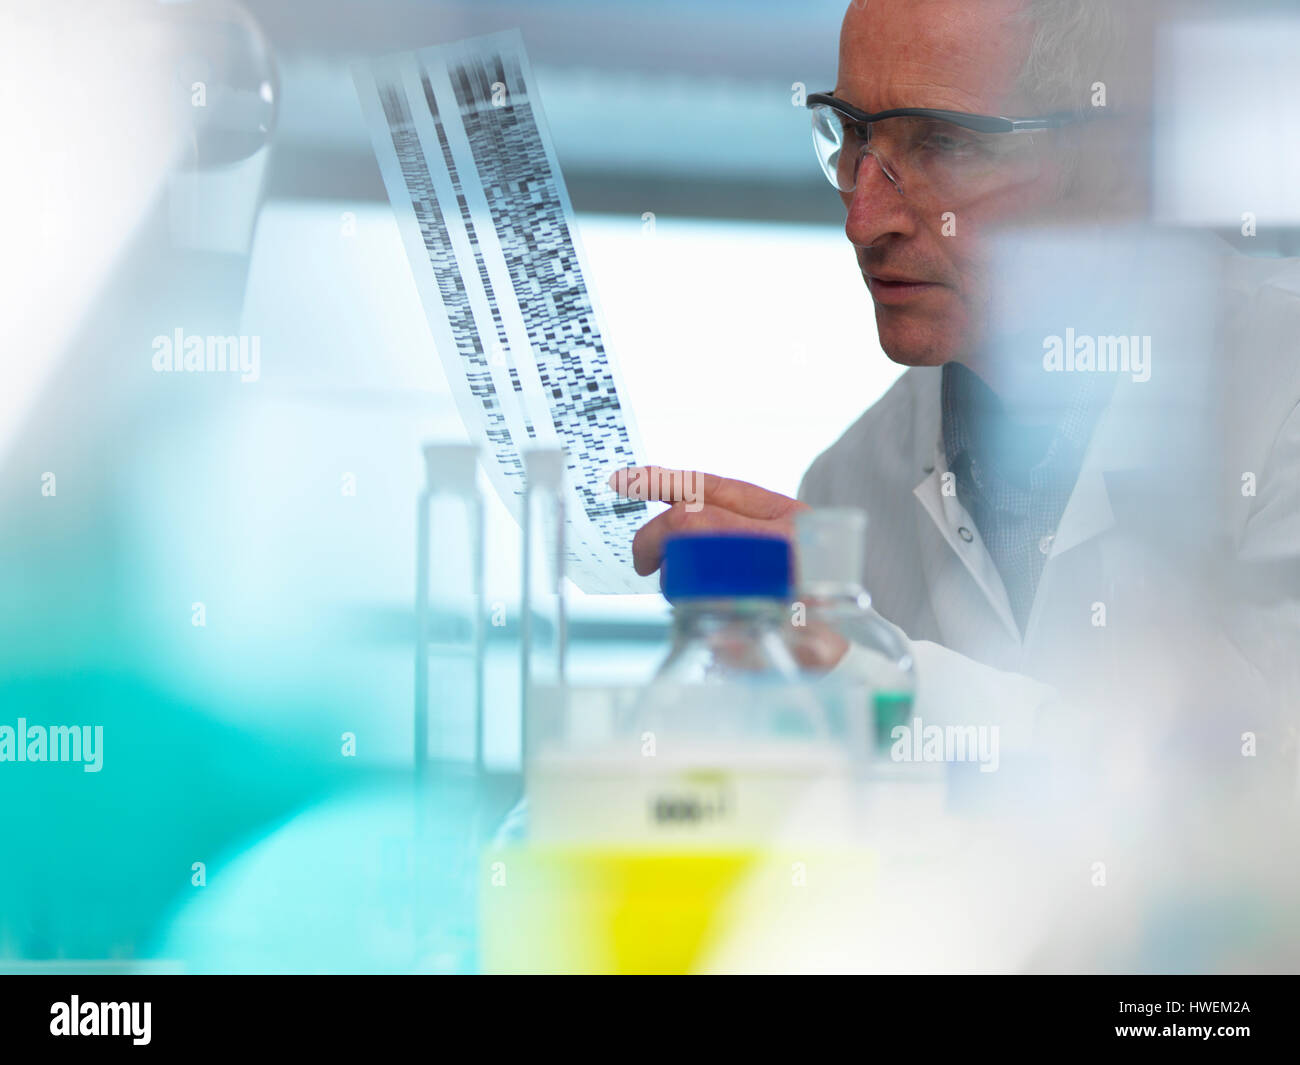 Researcher holding a DNA (deoxyribonucleic acid) gel during a genetic experiment in a laboratory Stock Photo